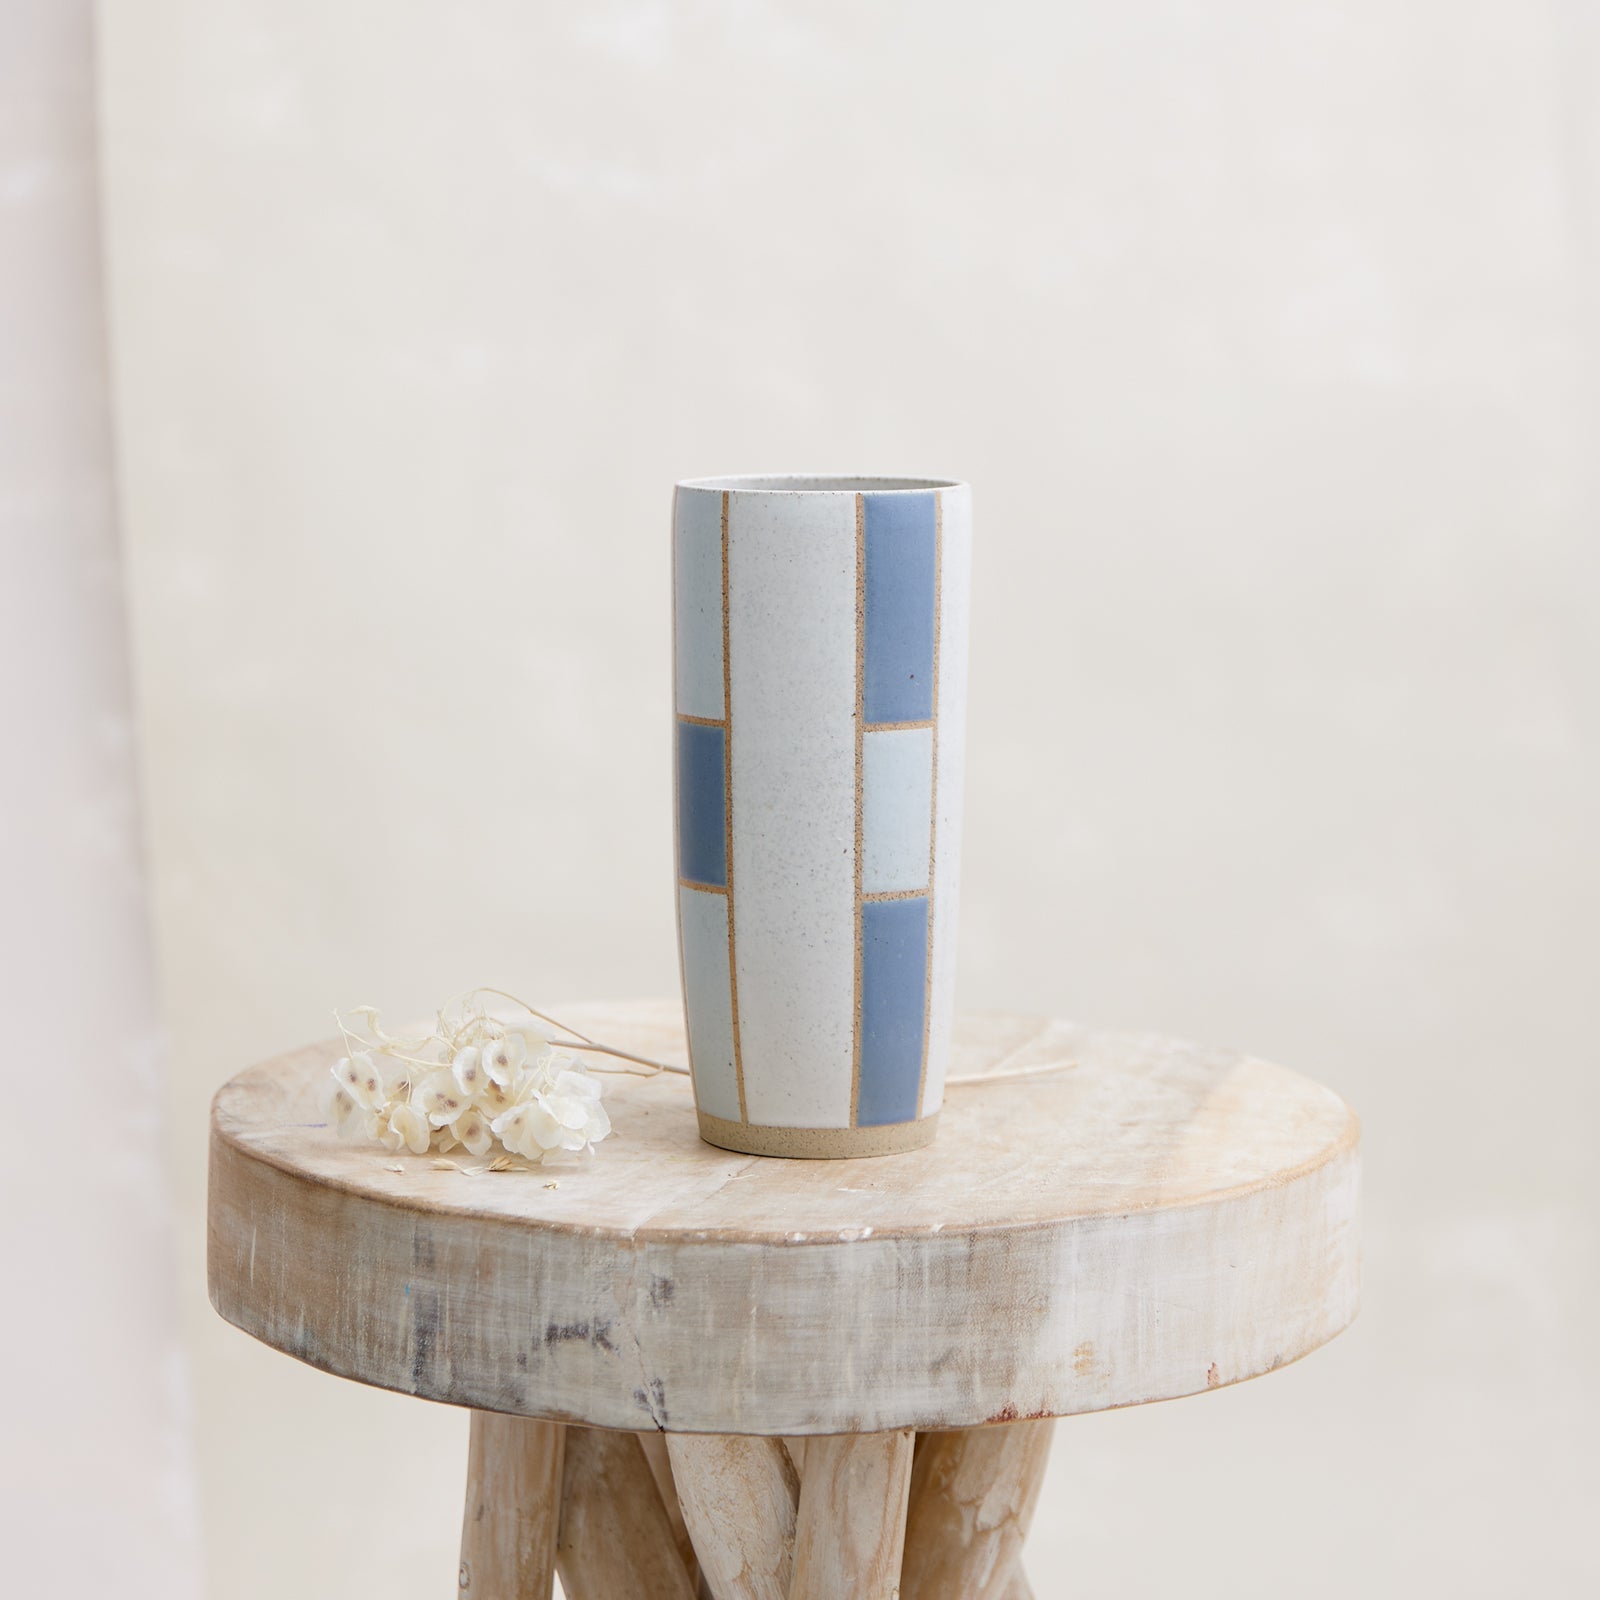 A front view of the Geometric Tapered Handmade Ceramic Vase in dark blue and grey glaze. The vase sits on a wooden stool next to dried flowers. The handmade vase is in a coastal-styled setting.